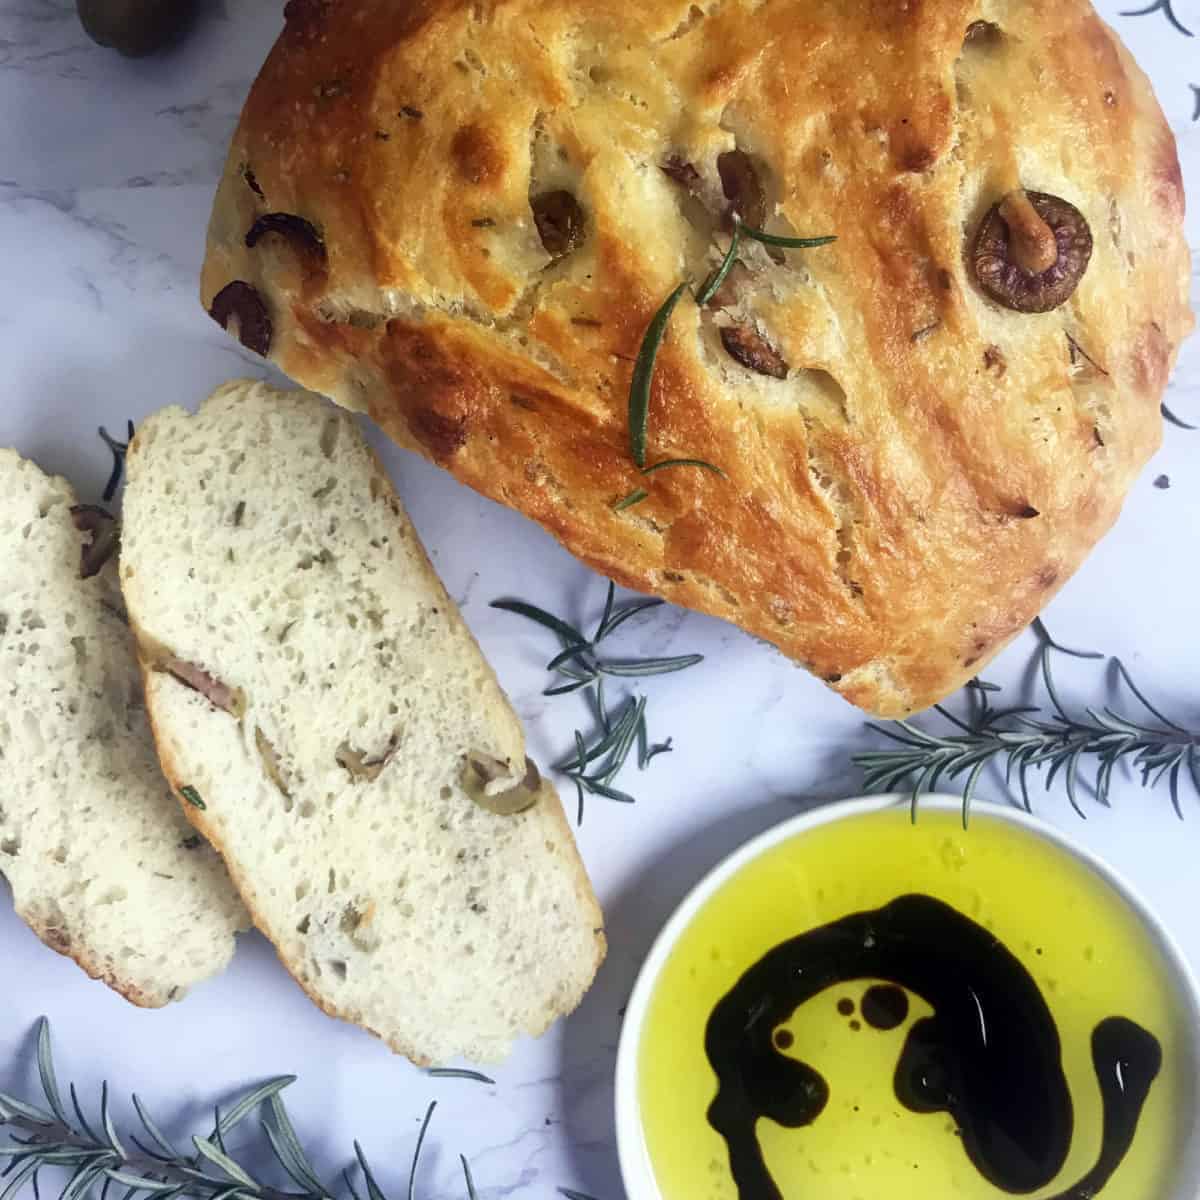 Rosemary and Olive Bread.
